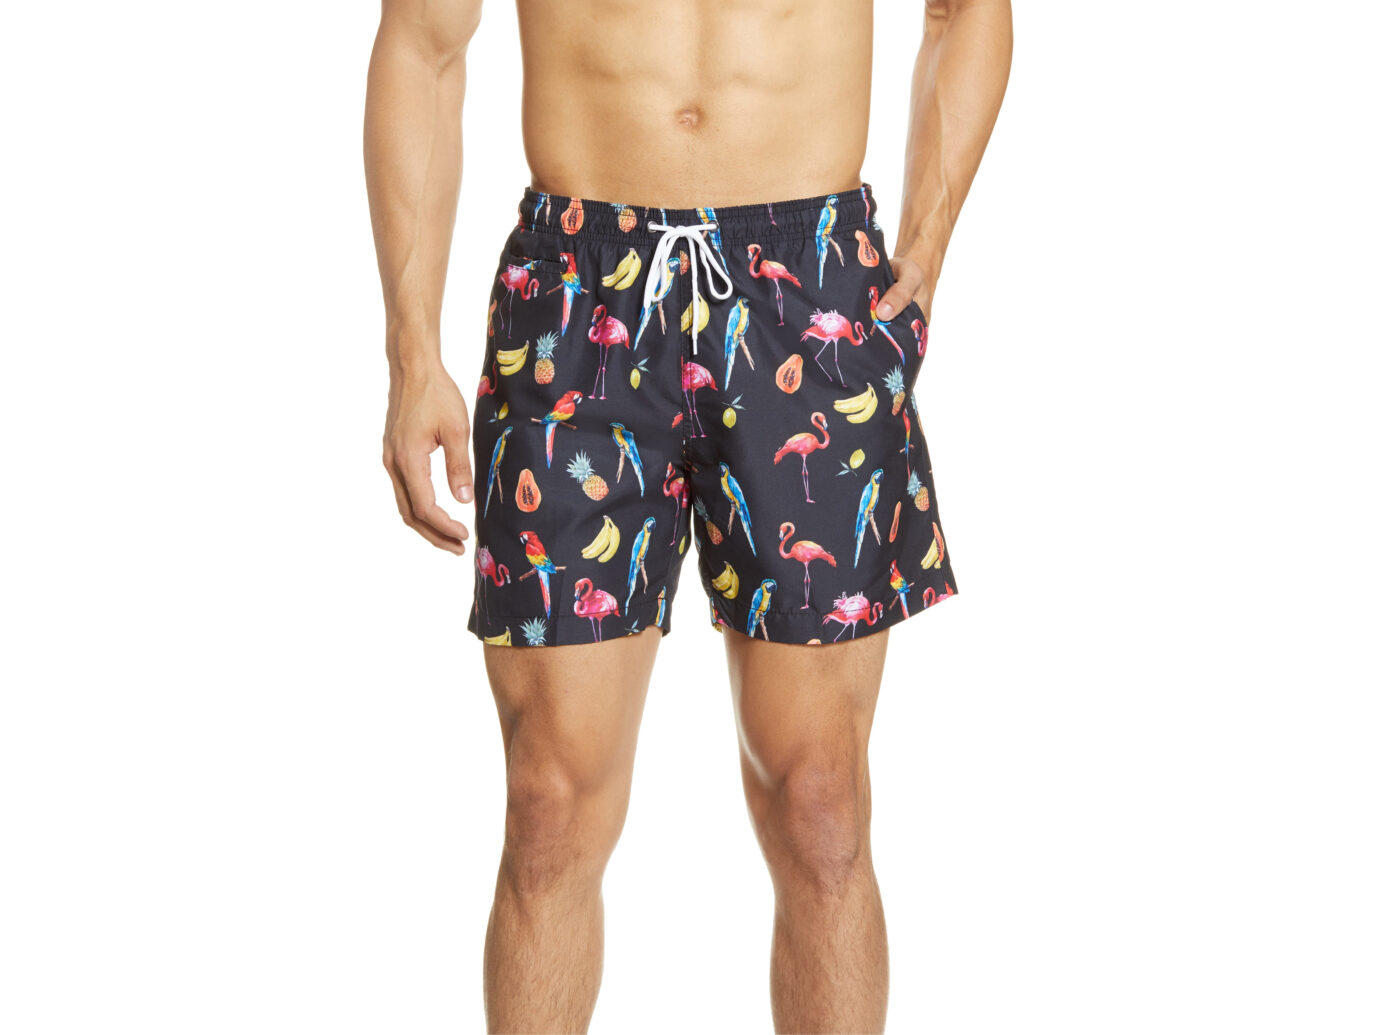 You Know And Good Election 2020 Mens Swim Trunks Bathing Suit Beach Shorts